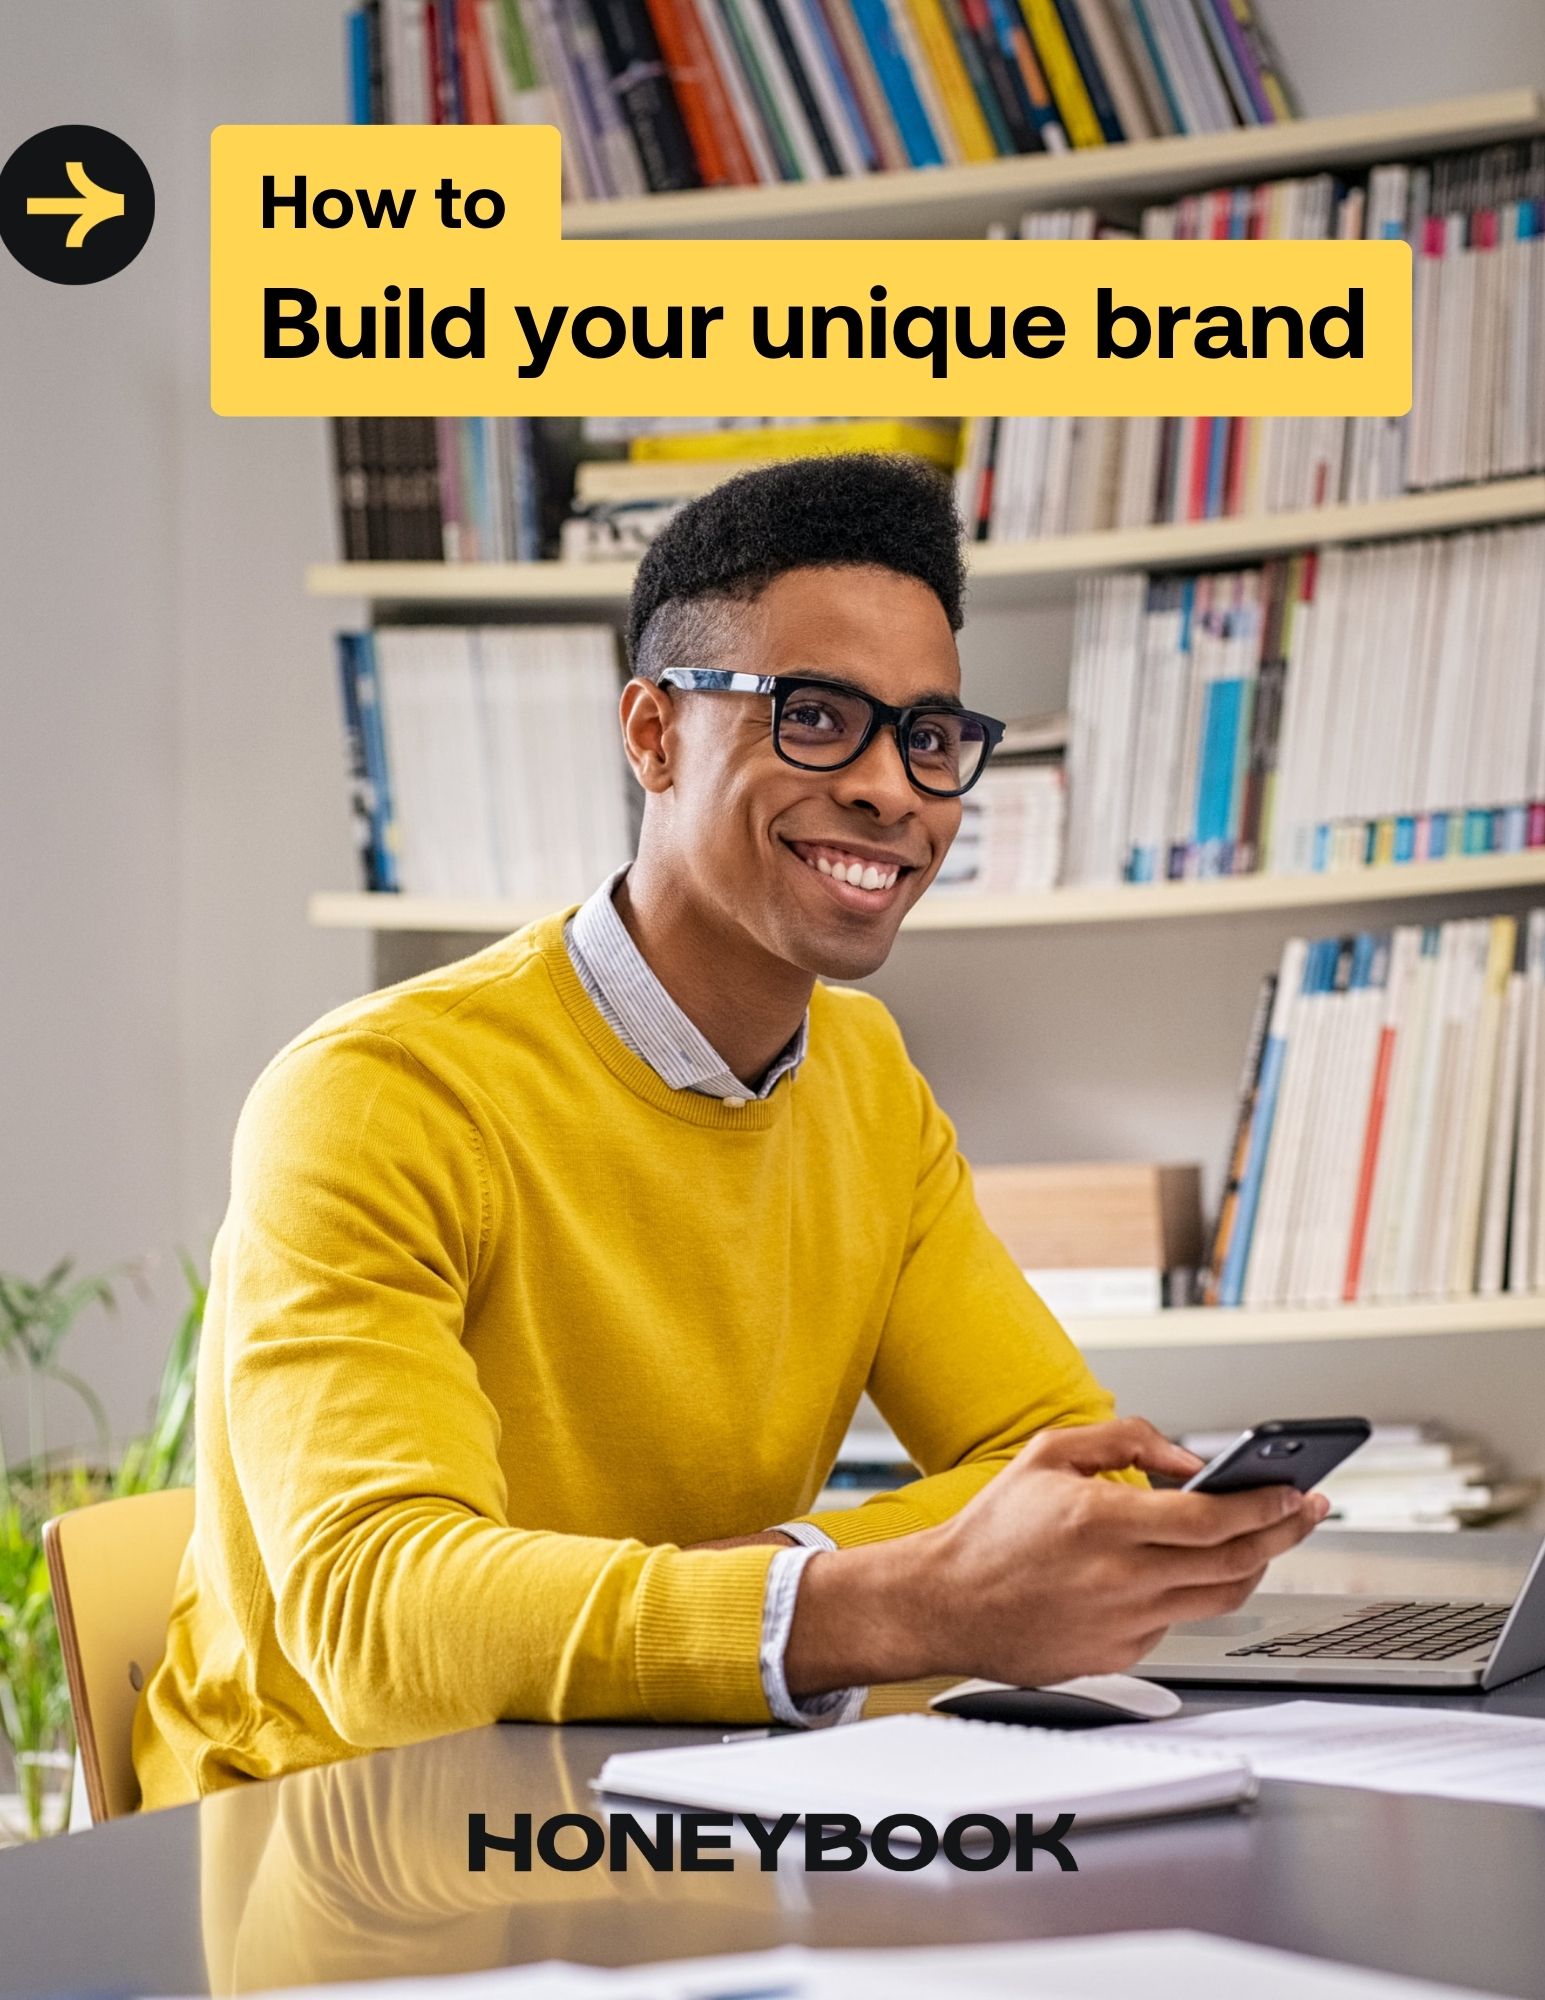 Man sits and smiles using phone in front of library on the cover of the build your unique brand guide.